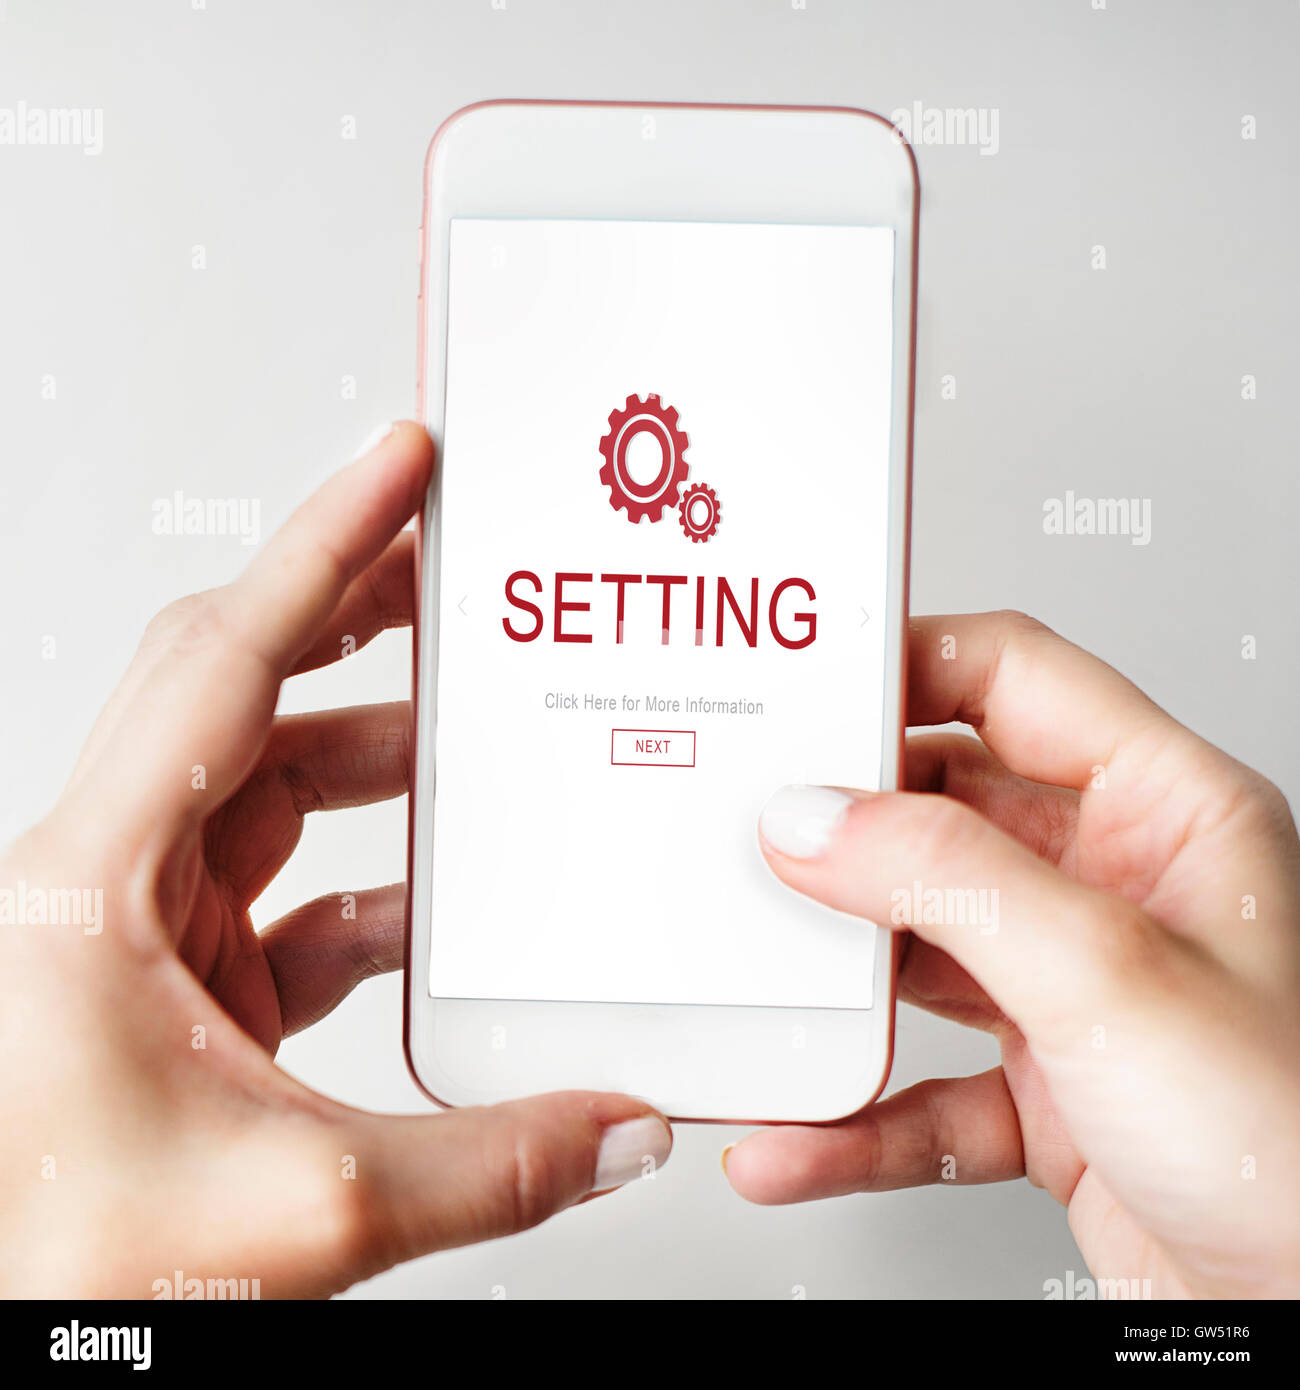 Settings Electronic Device Homepage Concept Stock Photo